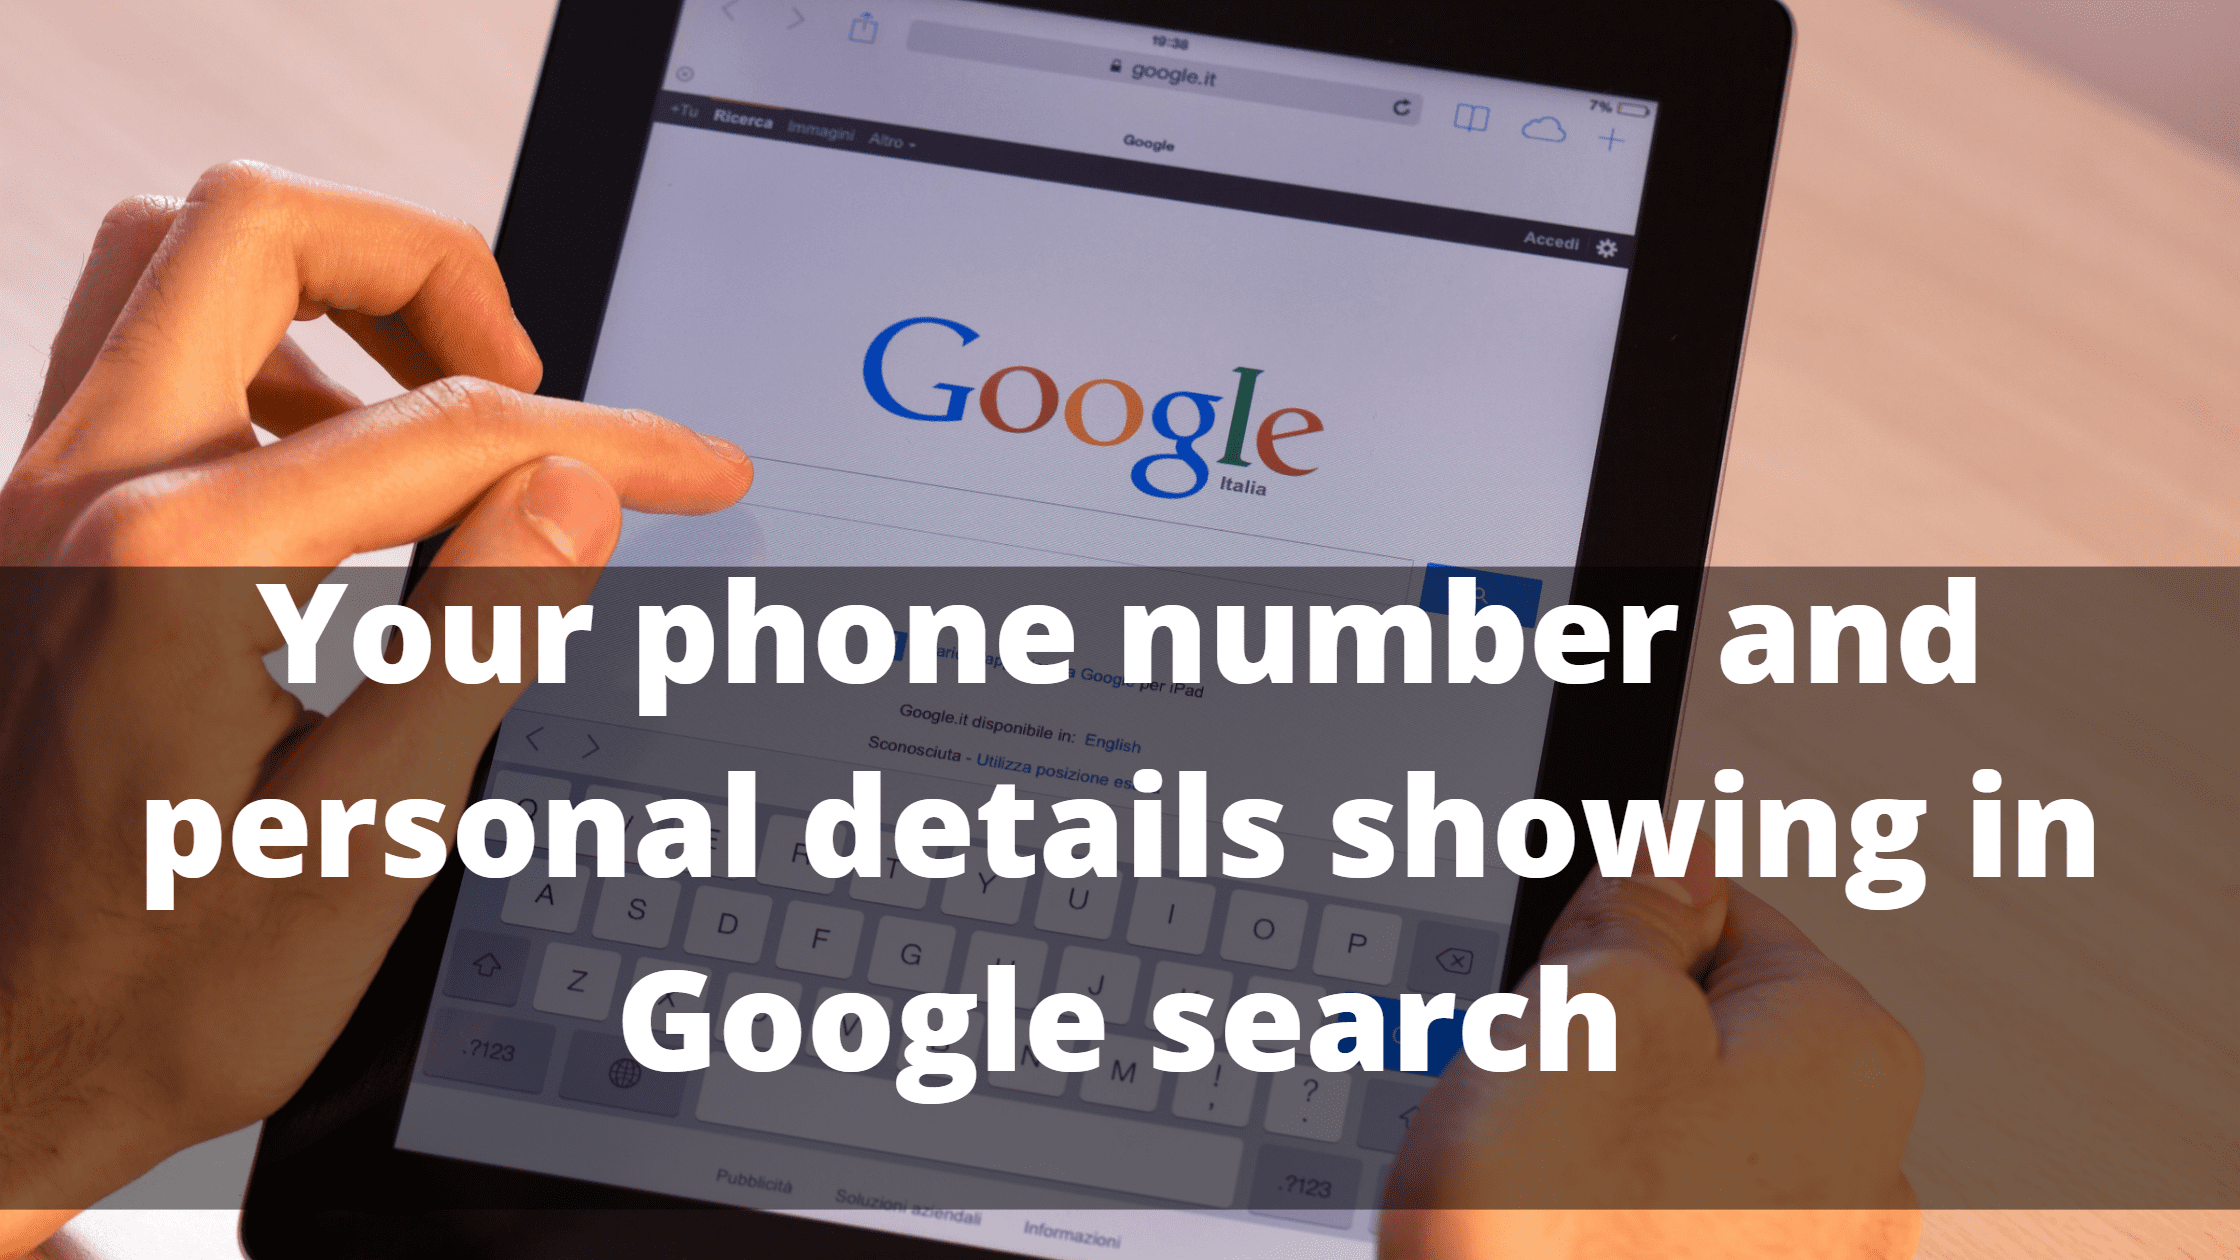 Your phone number and personal details showing in Google search?